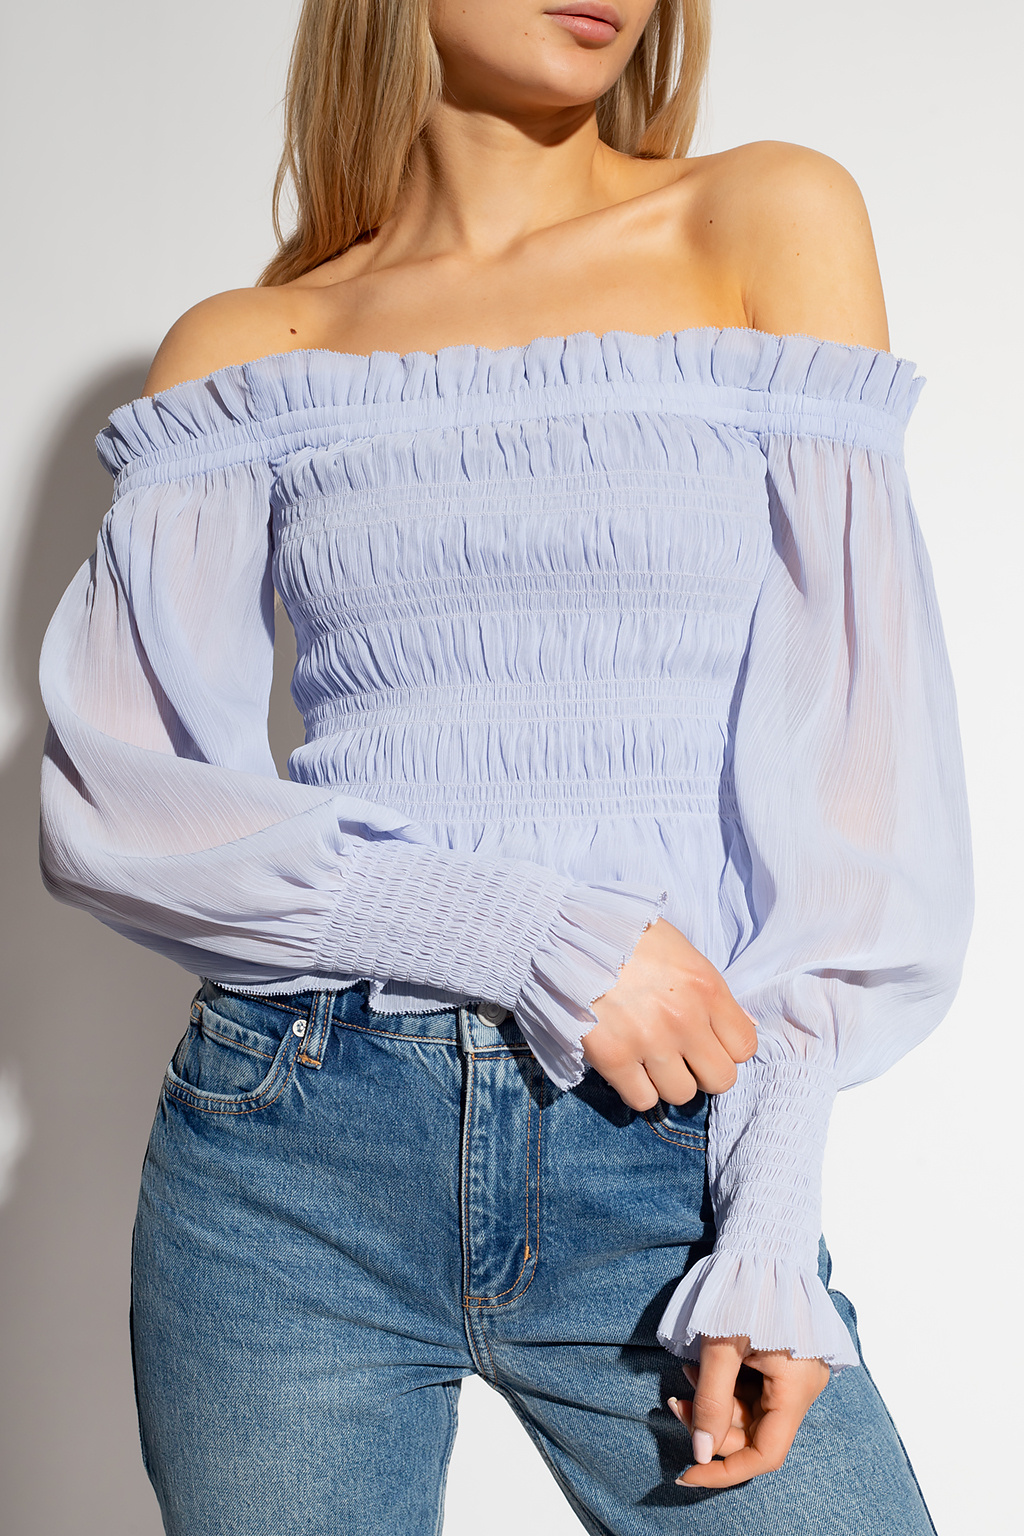 AllSaints ‘Lara’ top with puff sleeves